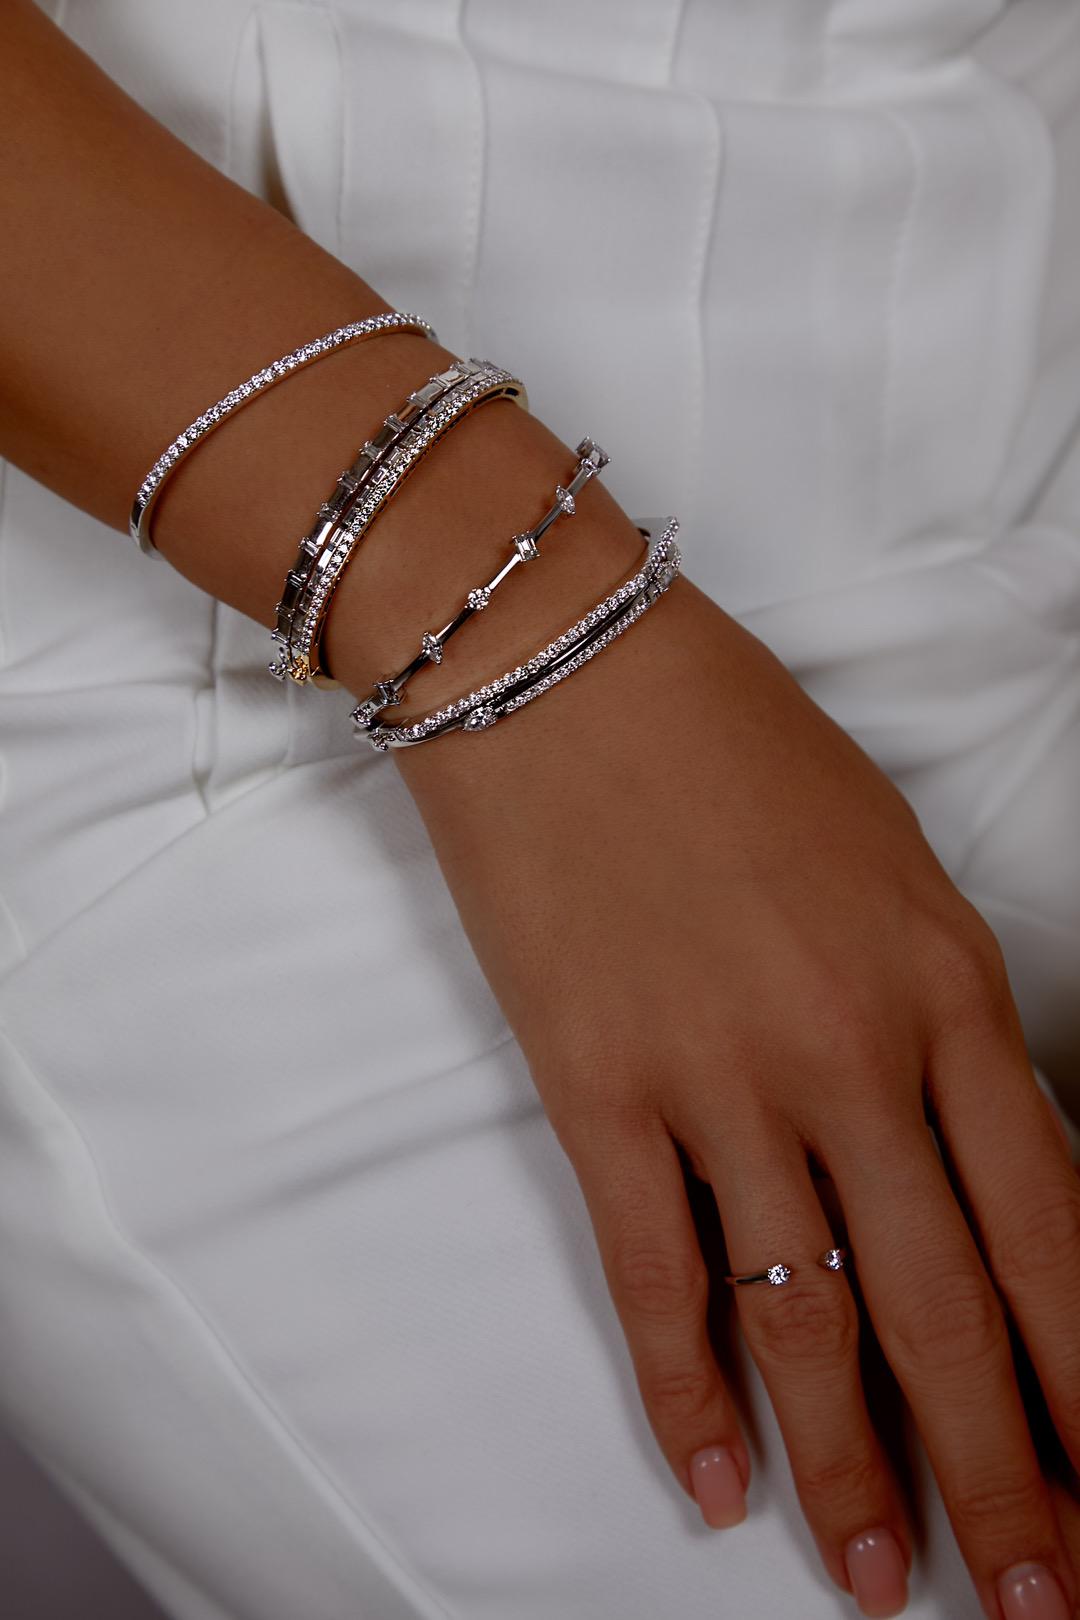 This diamond collection showcases elegant pieces that are extremely versatile and a timeless addition to your jewelry collection and are perfect for everyday wear. These pieces are part of our dainty and fine jewelry line known as TanisaJewelry -